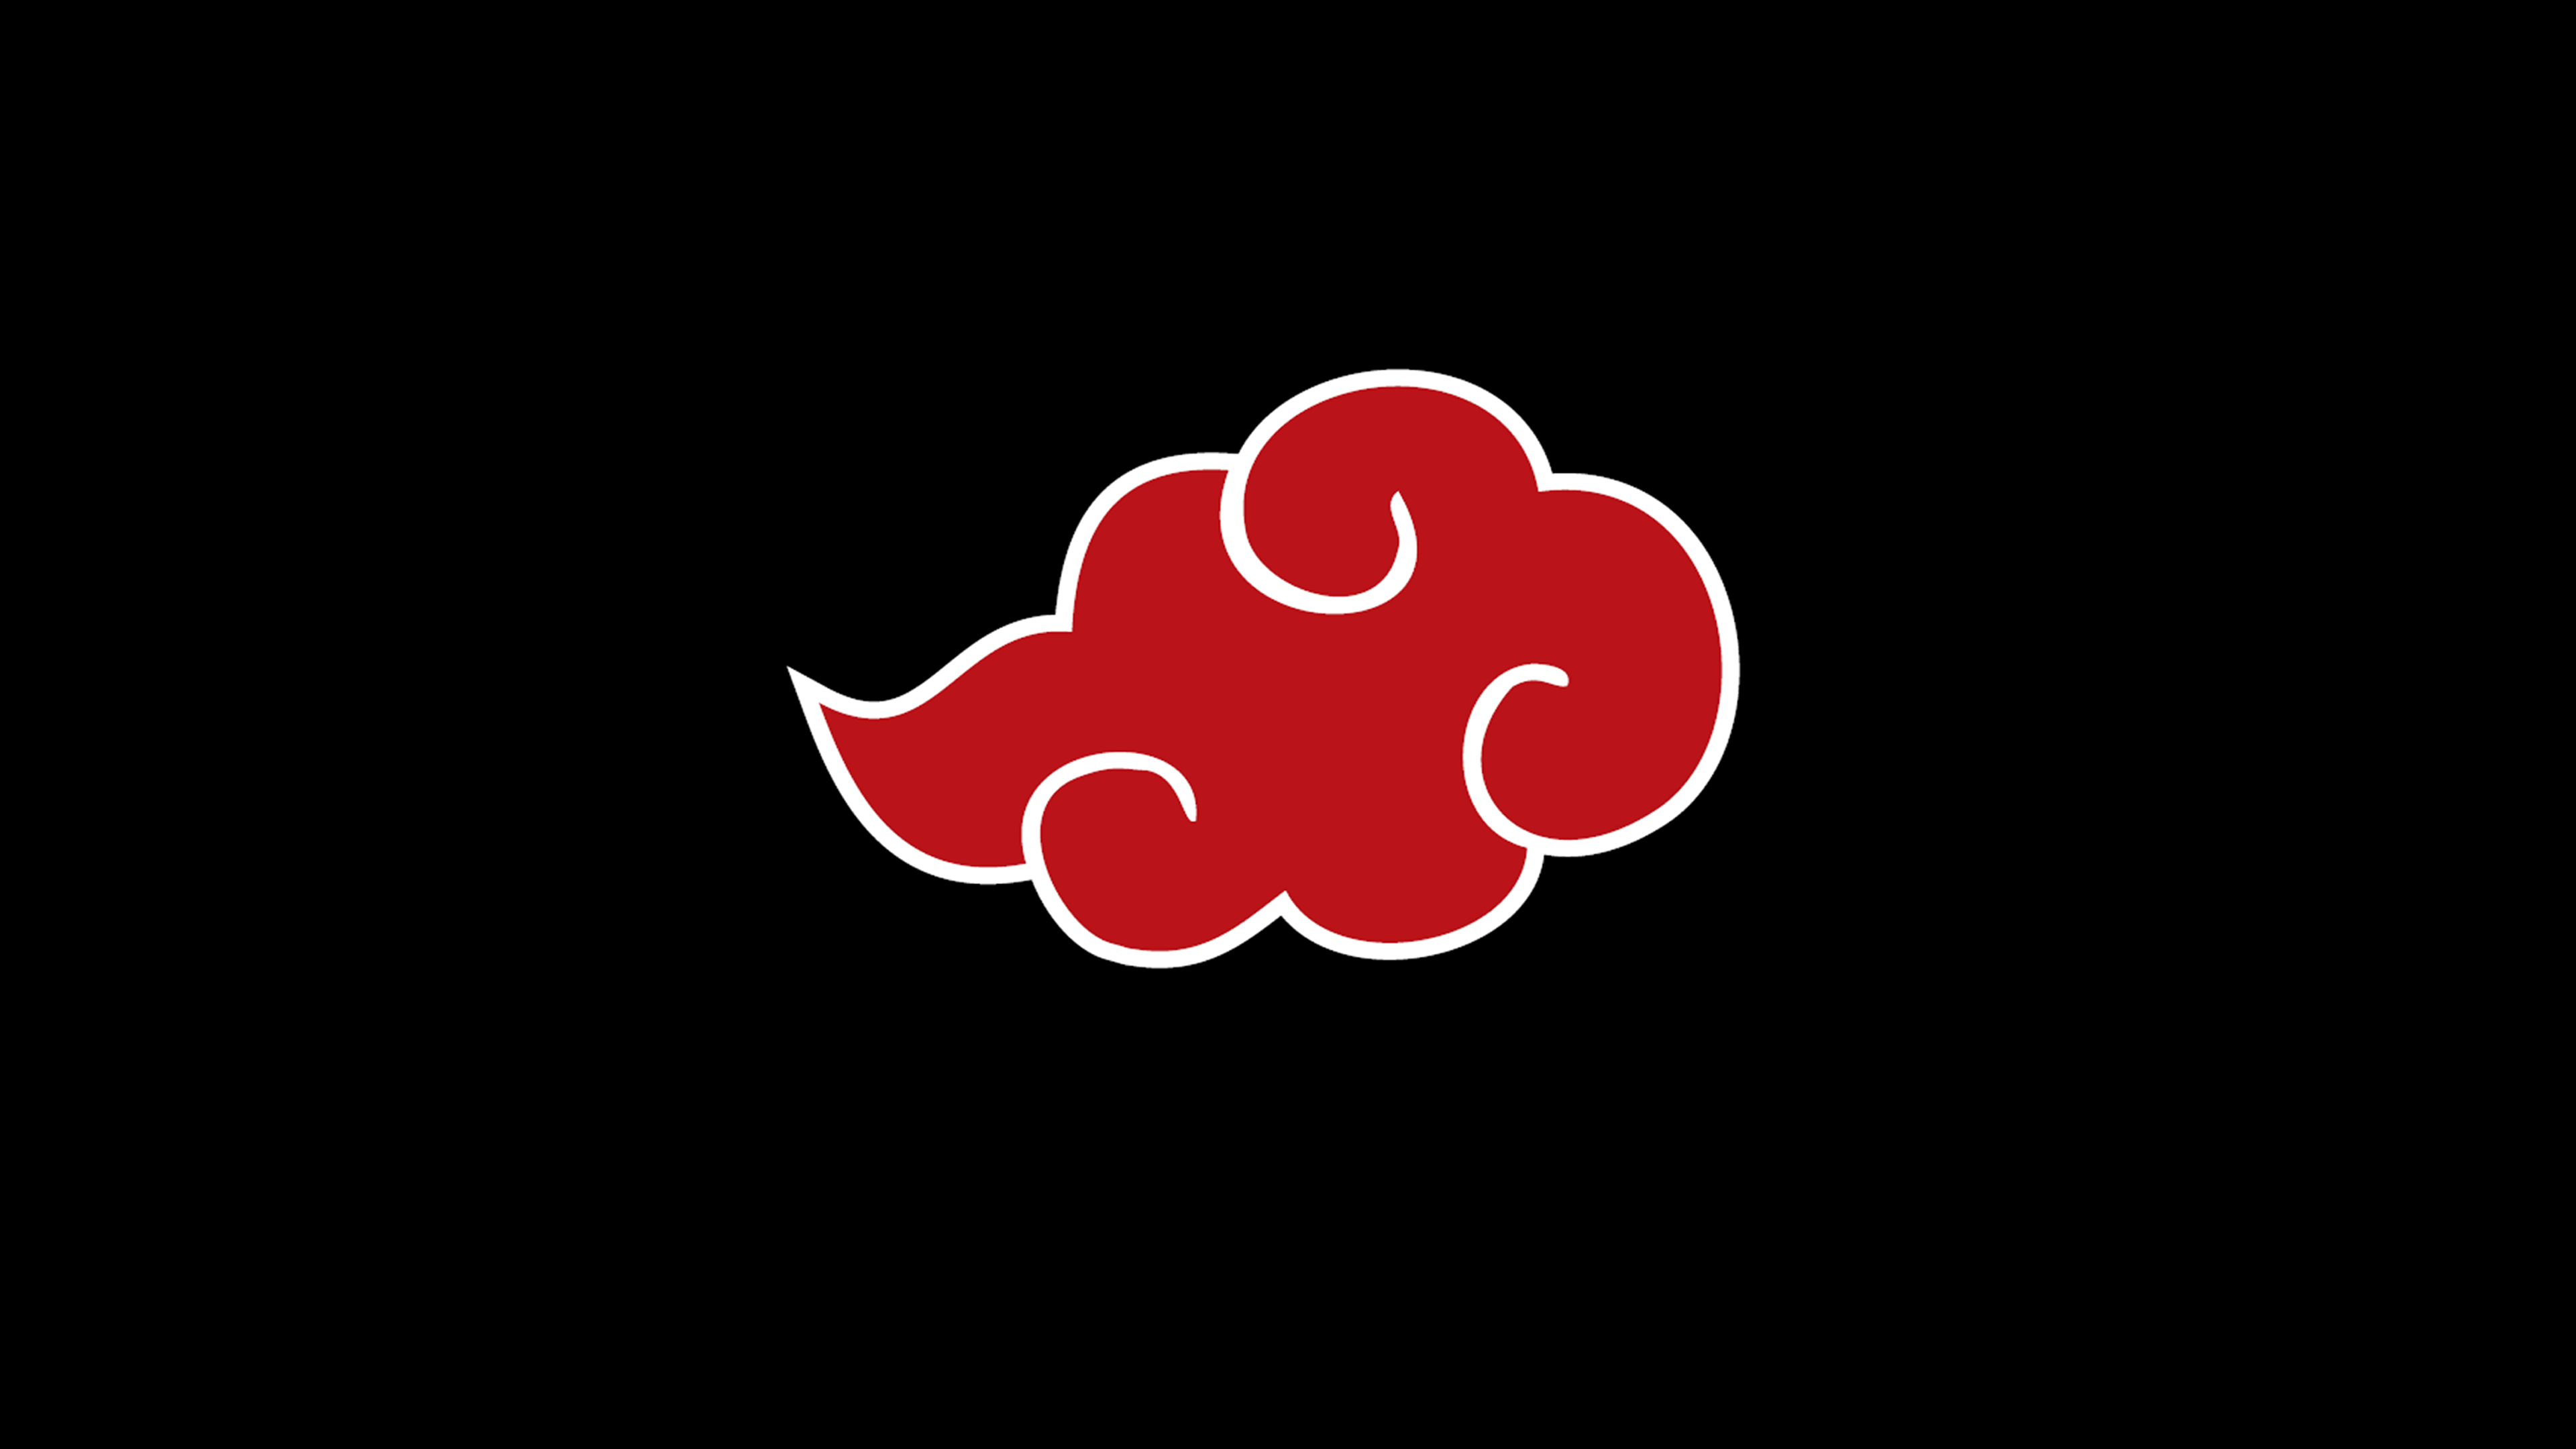 red zcloud logo